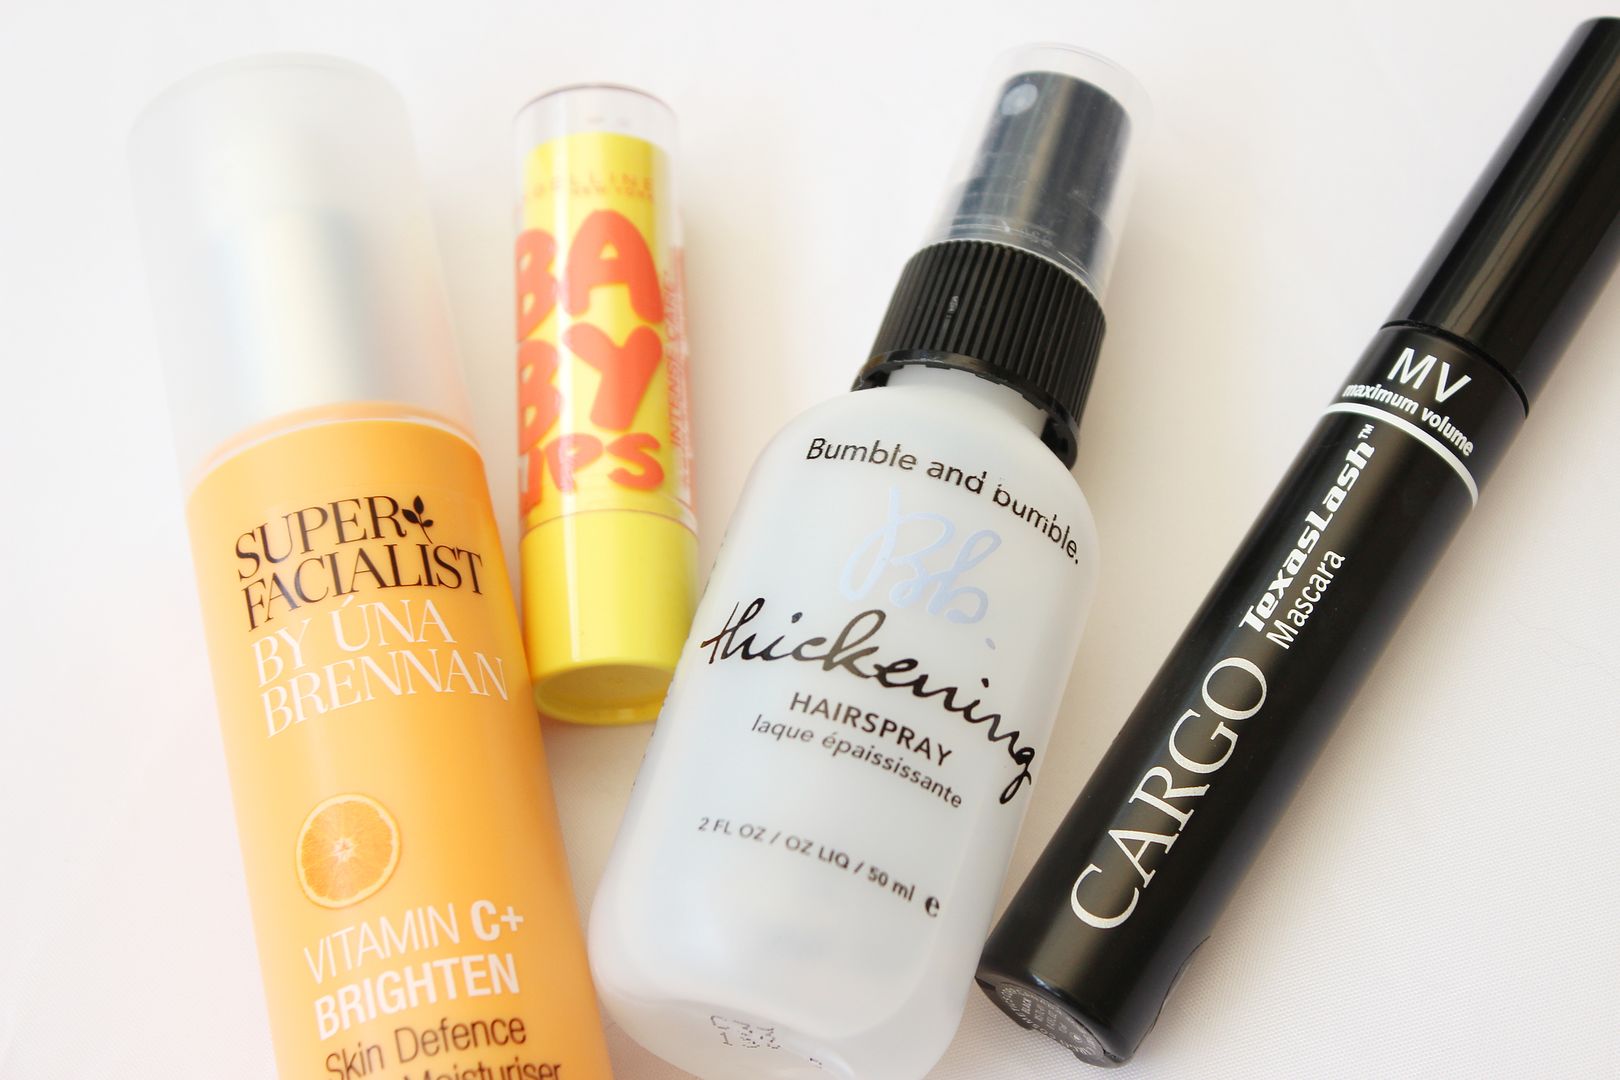 August favourites